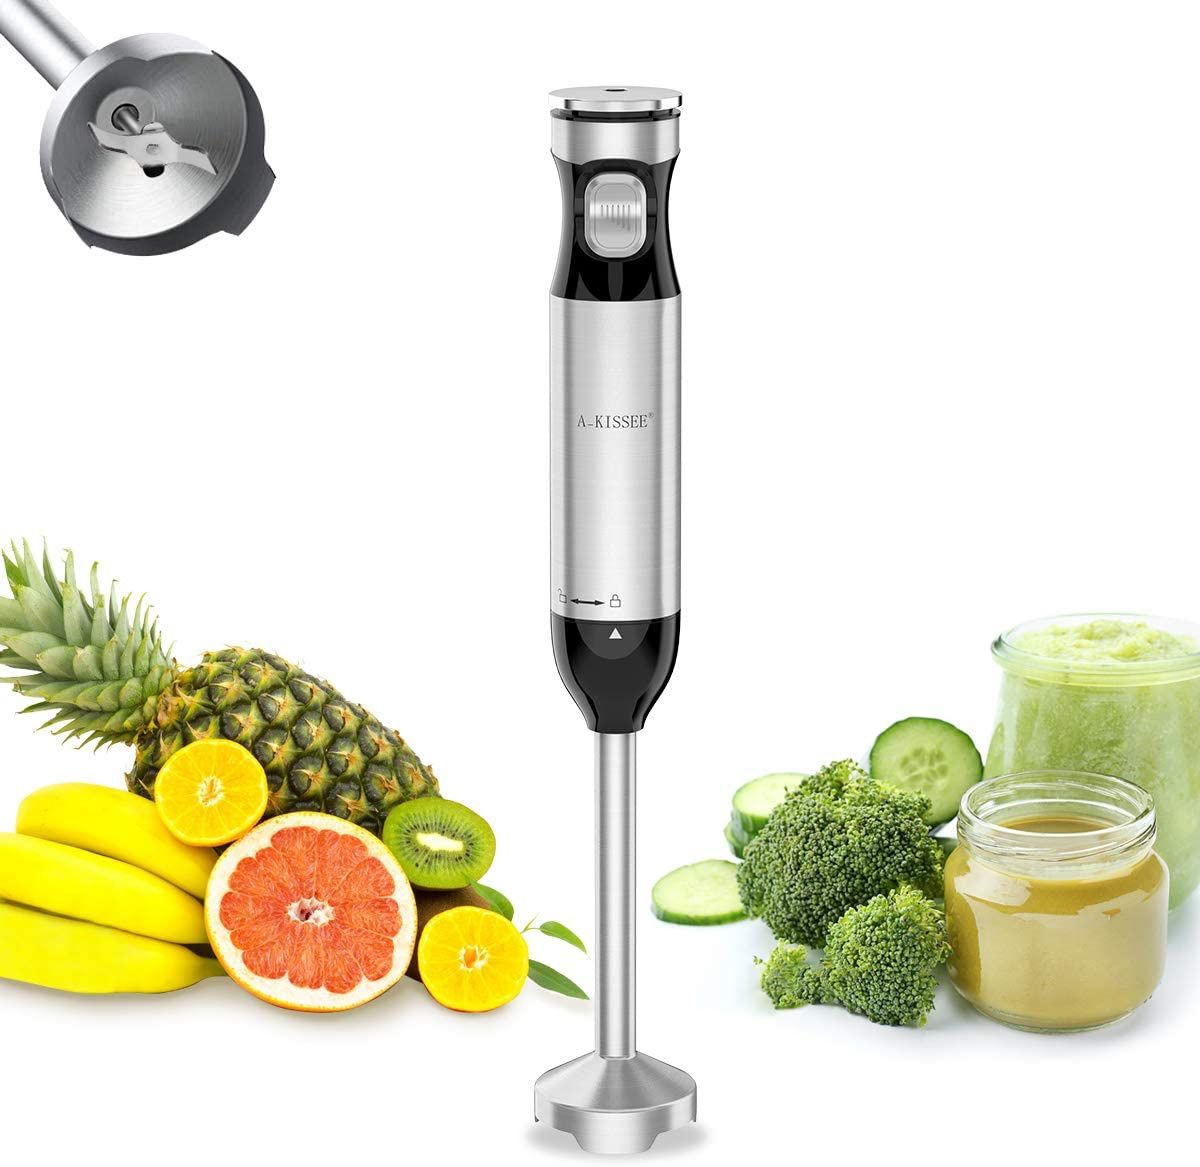 Hand Blender Mixer,Mini Electric Stick with Multi-Speed Control & Safety Child Lock For Baby Food,Fruits,Sauces and Soup